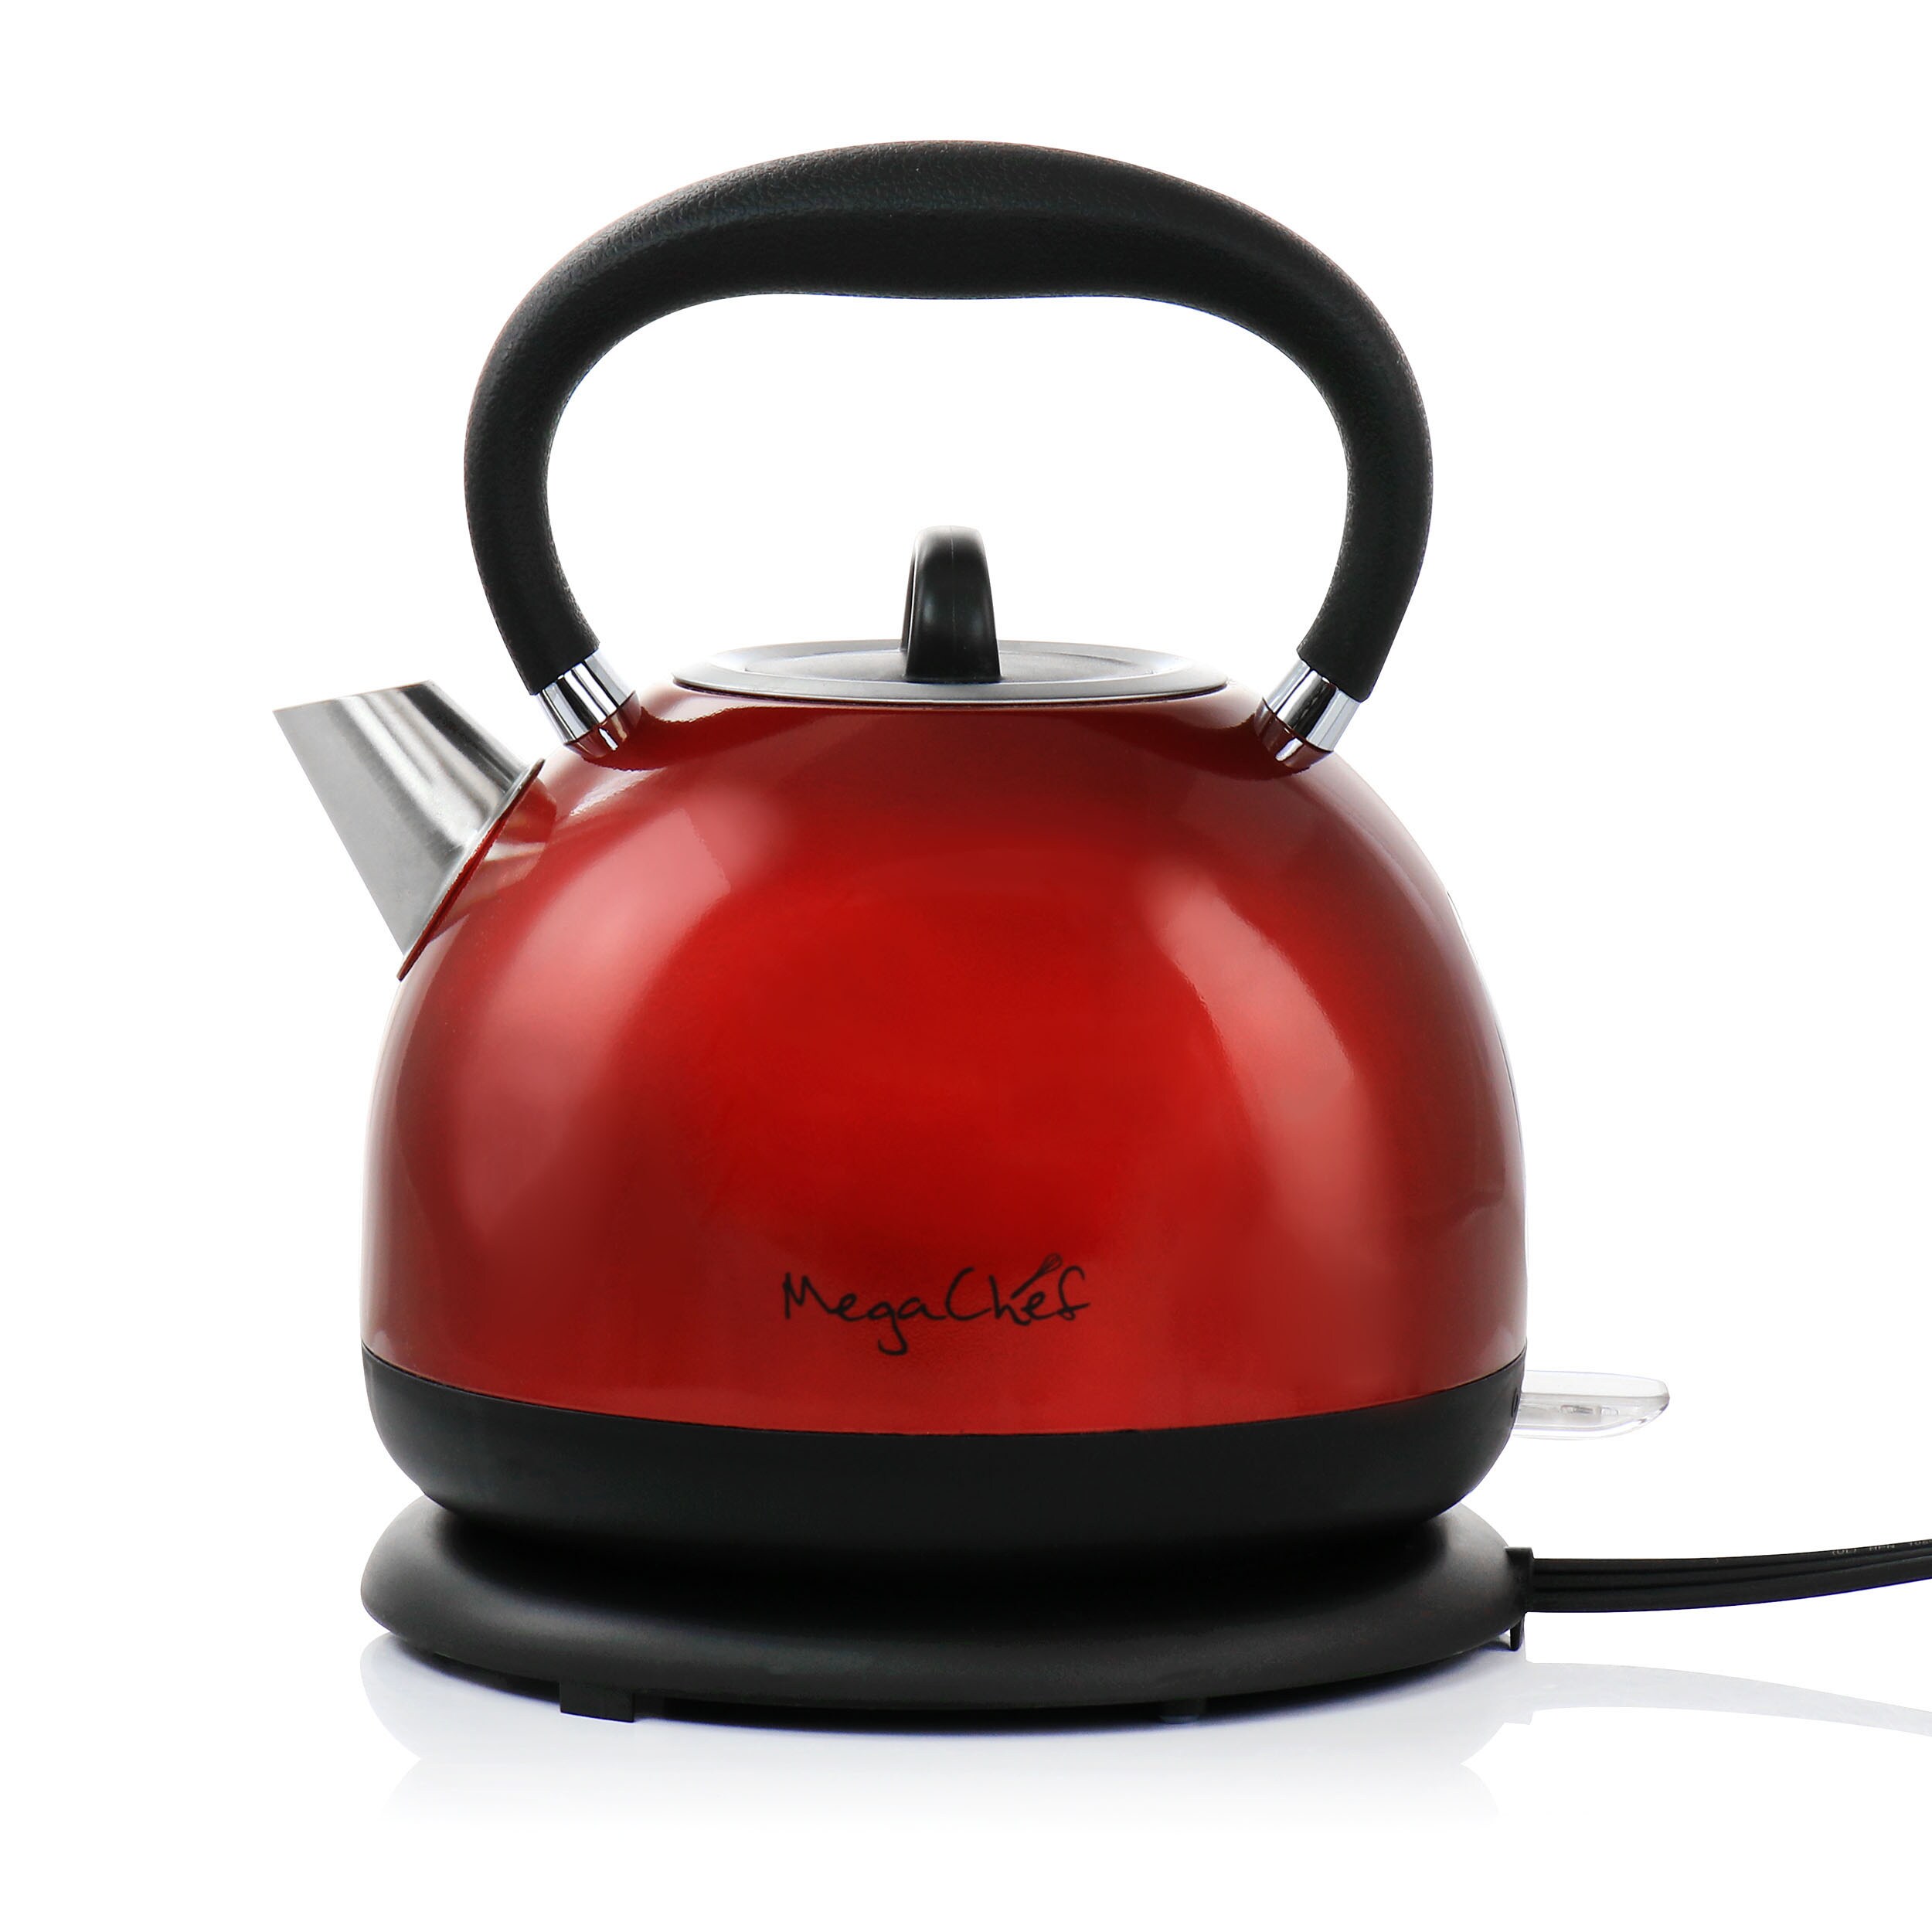 Haden Cotswold Putty 7-Cup Cordless Electric Kettle in the Water Boilers &  Kettles department at